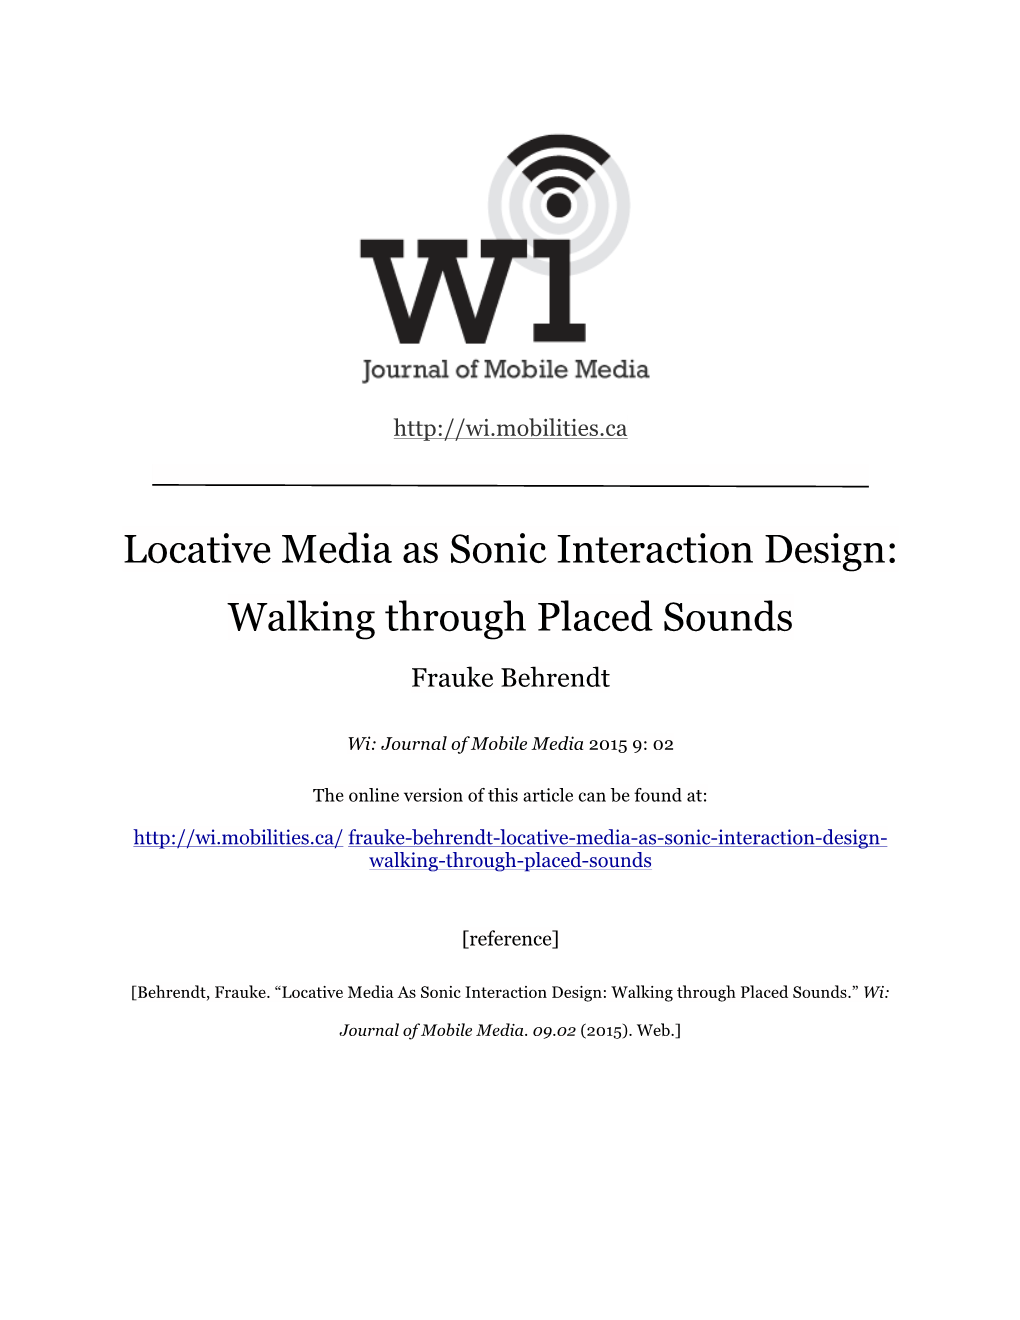 Locative Media As Sonic Interaction Design: Walking Through Placed Sounds.” Wi